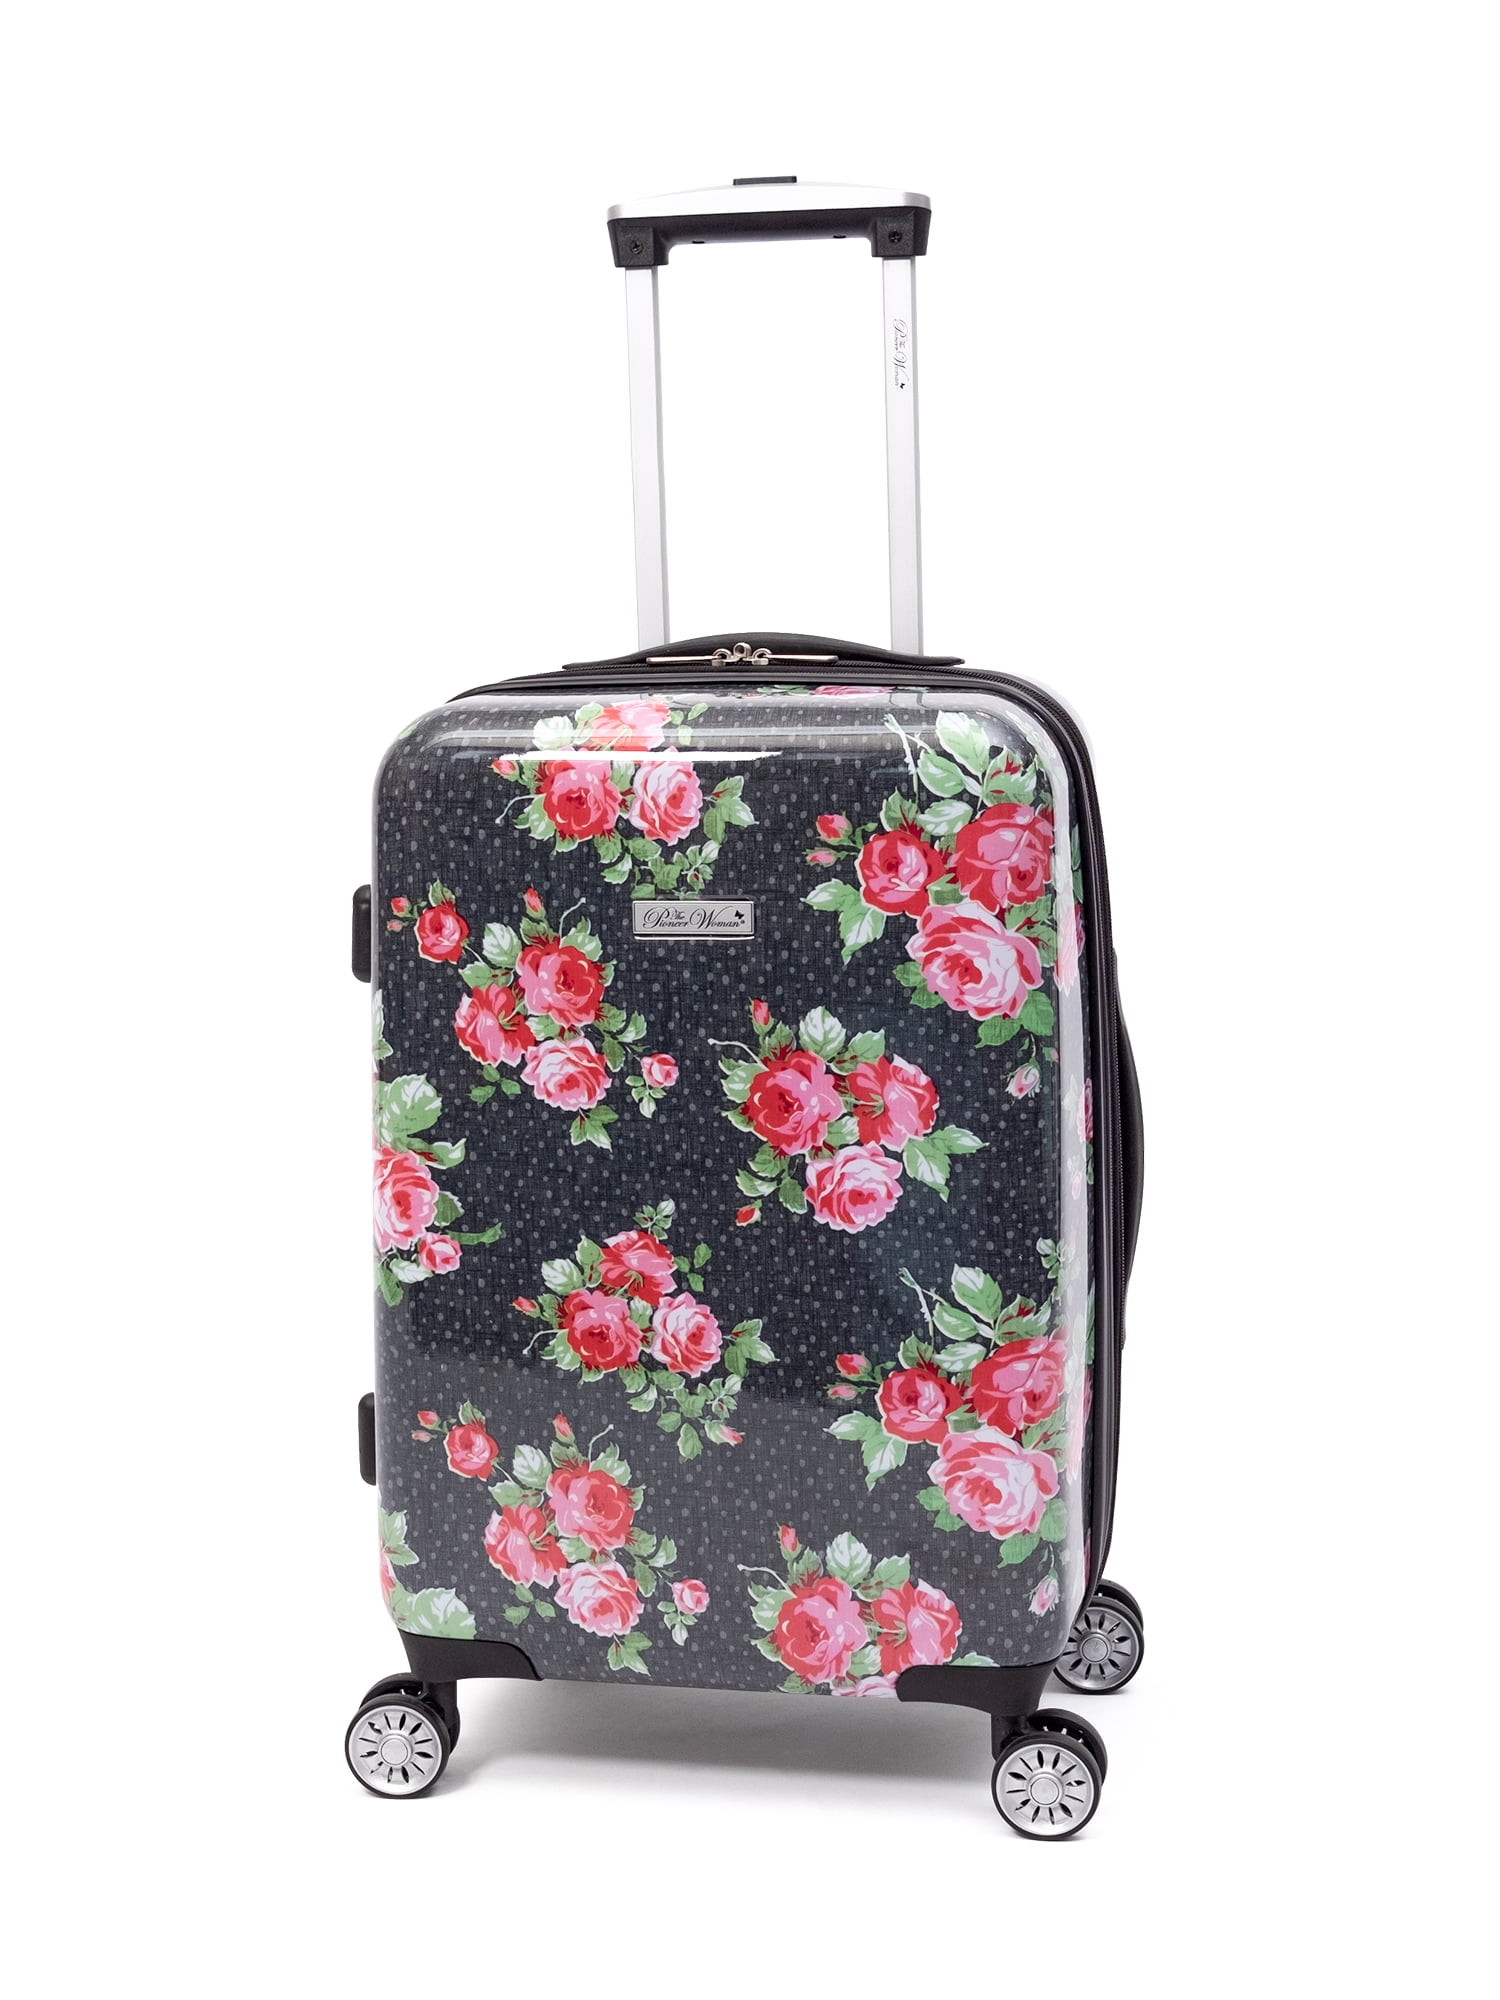 The Best Carry on Bag for a Woman